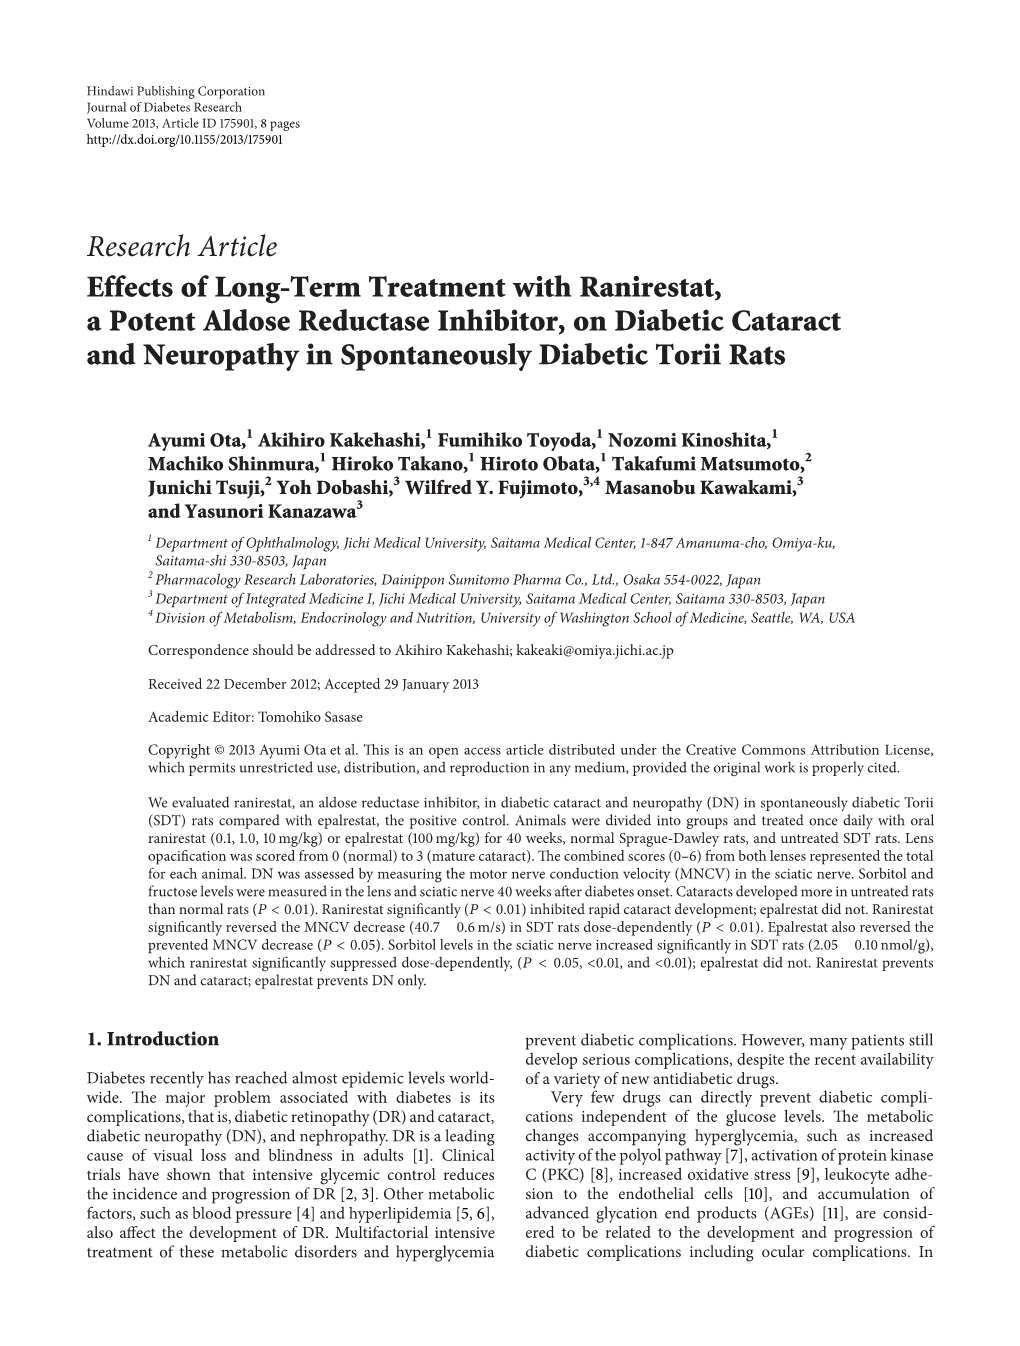 Effects of Long-Term Treatment with Ranirestat, a Potent Aldose Reductase Inhibitor, on Diabetic Cataract and Neuropathy in Spontaneously Diabetic Torii Rats